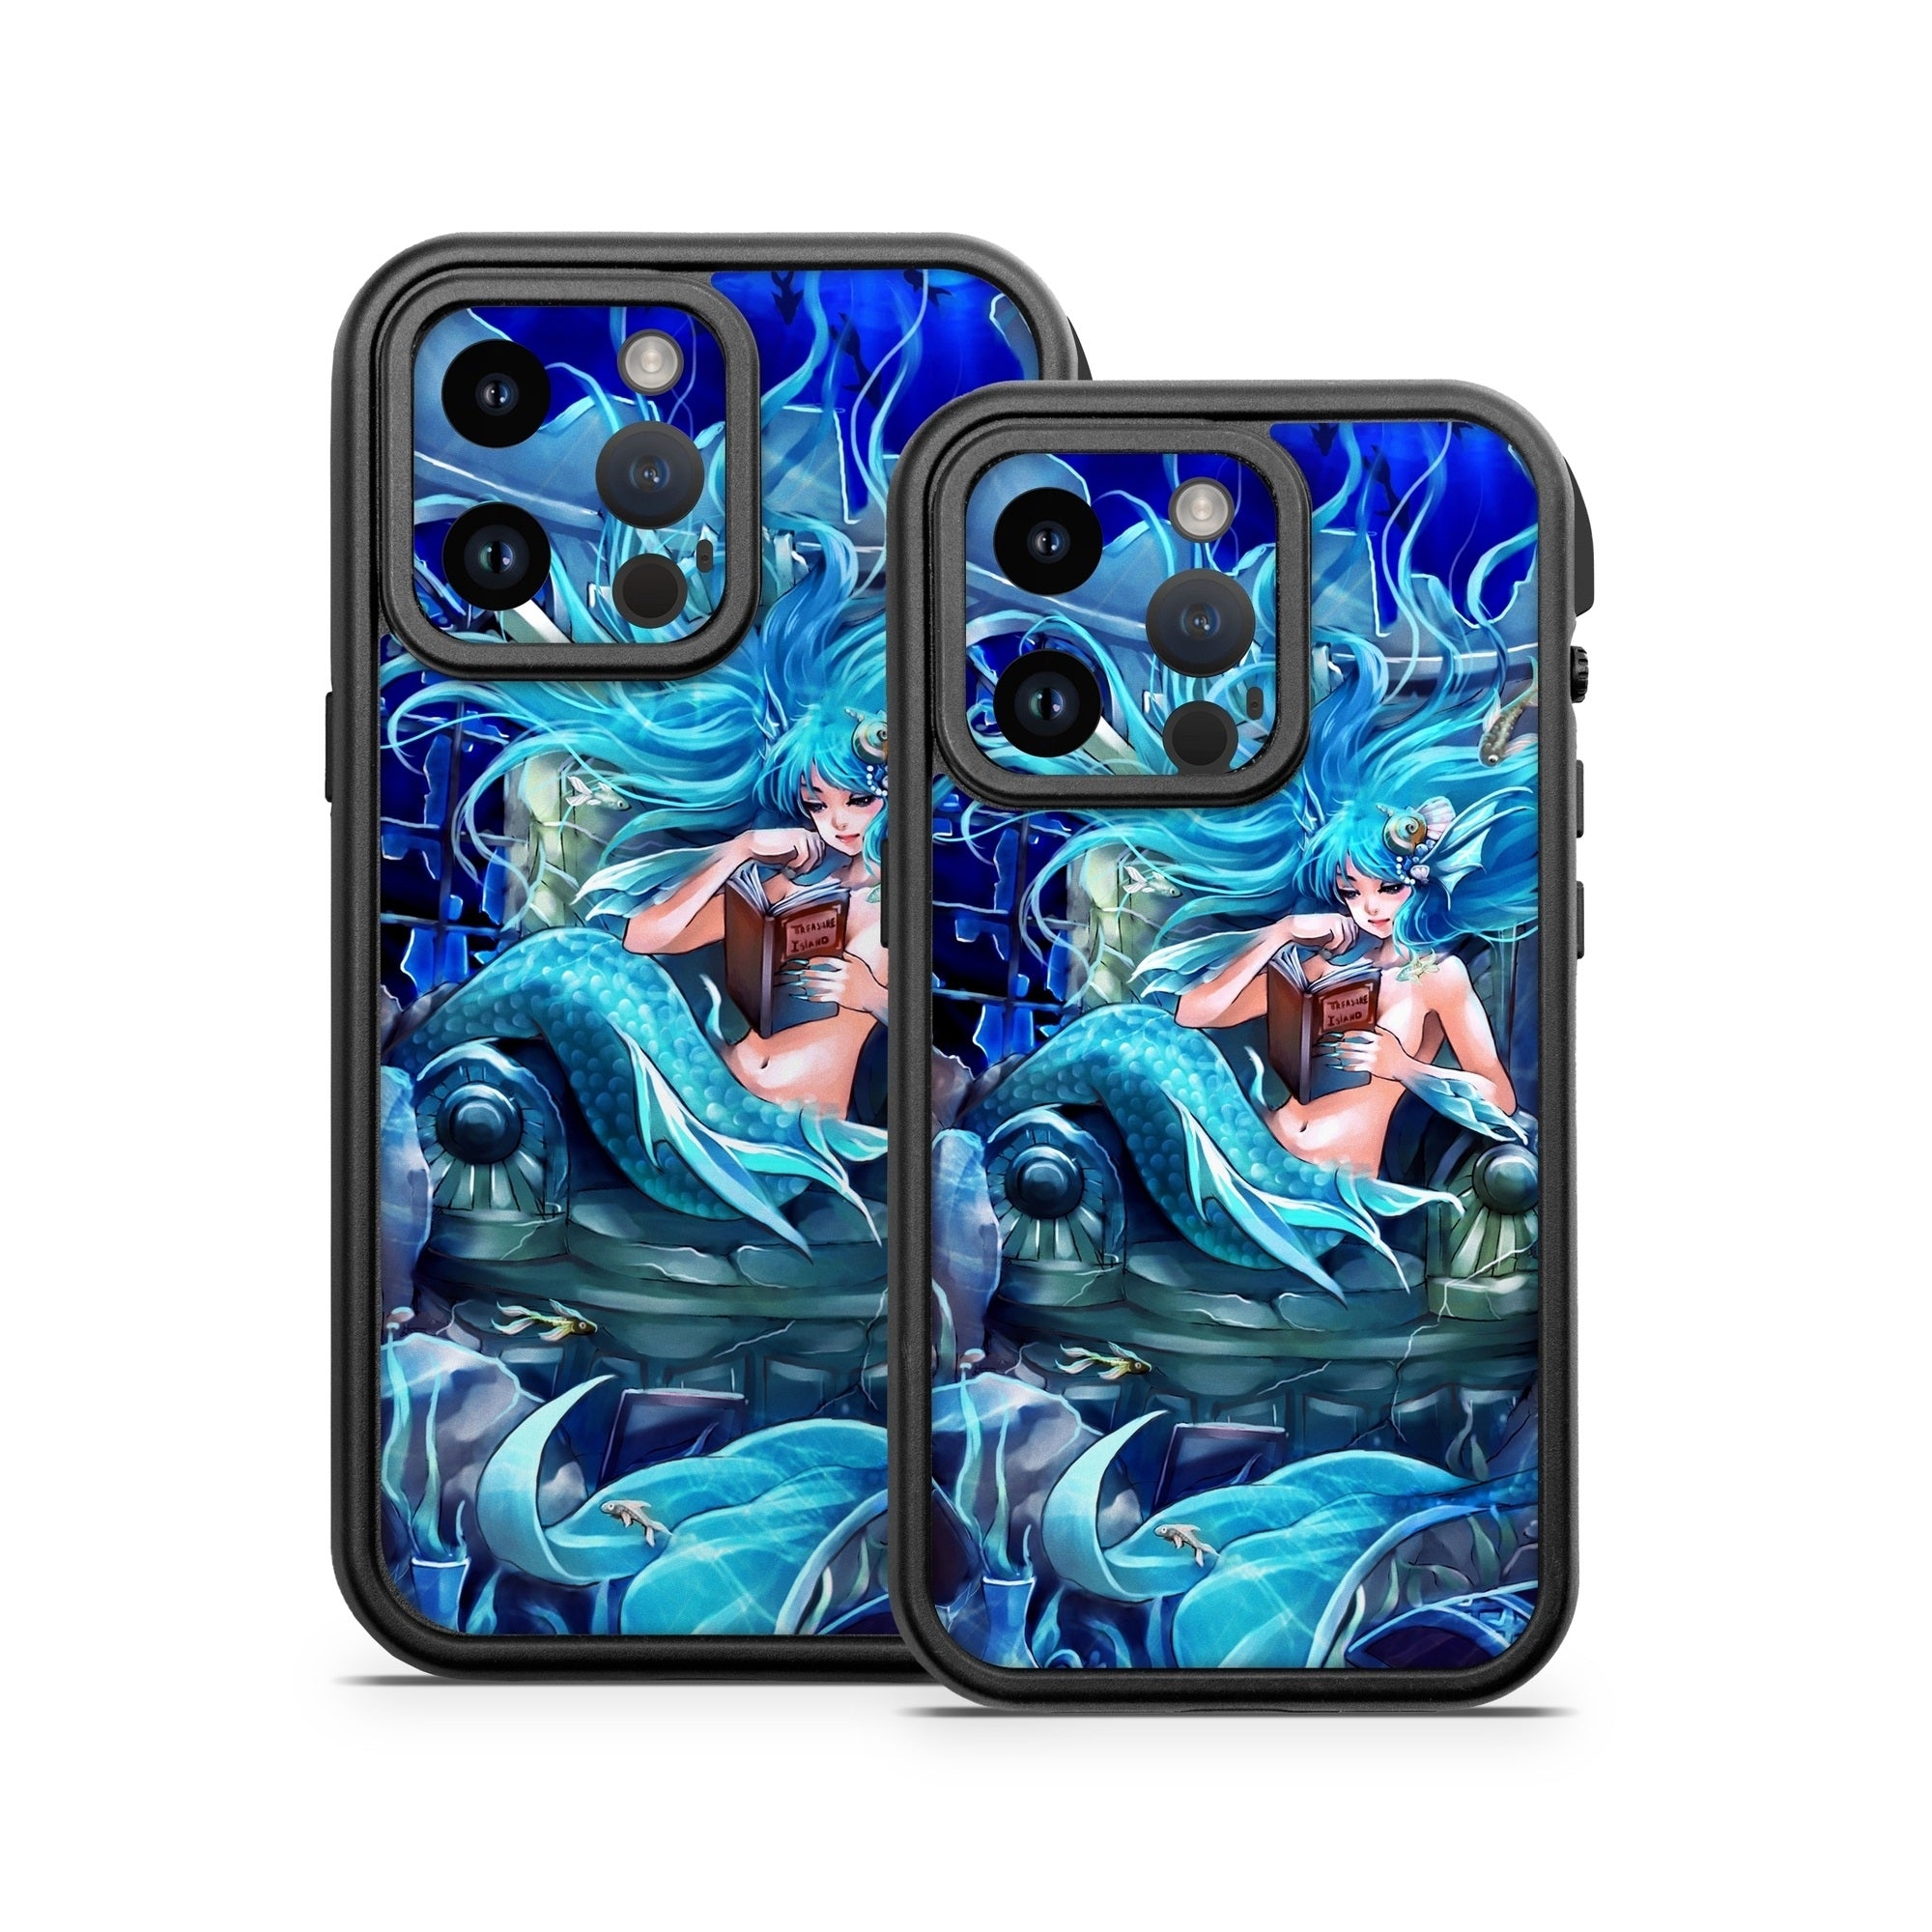 In Her Own World - Otterbox Fre iPhone 14 Case Skin